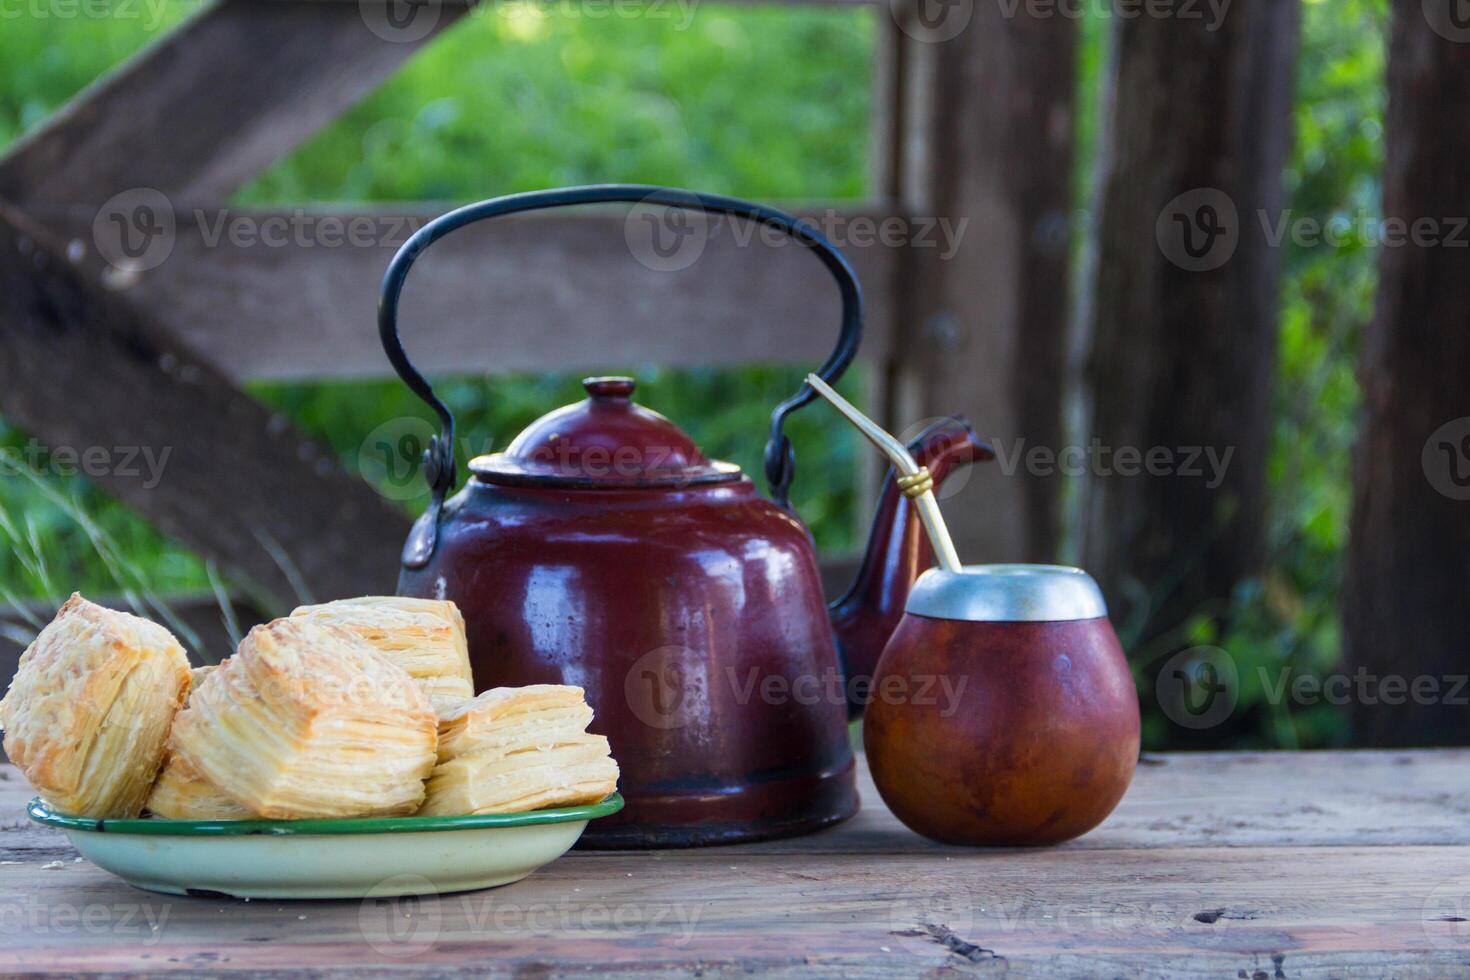 Mate and kettle with a plate of salty Argentine biscuits and yerba mate infusion photo